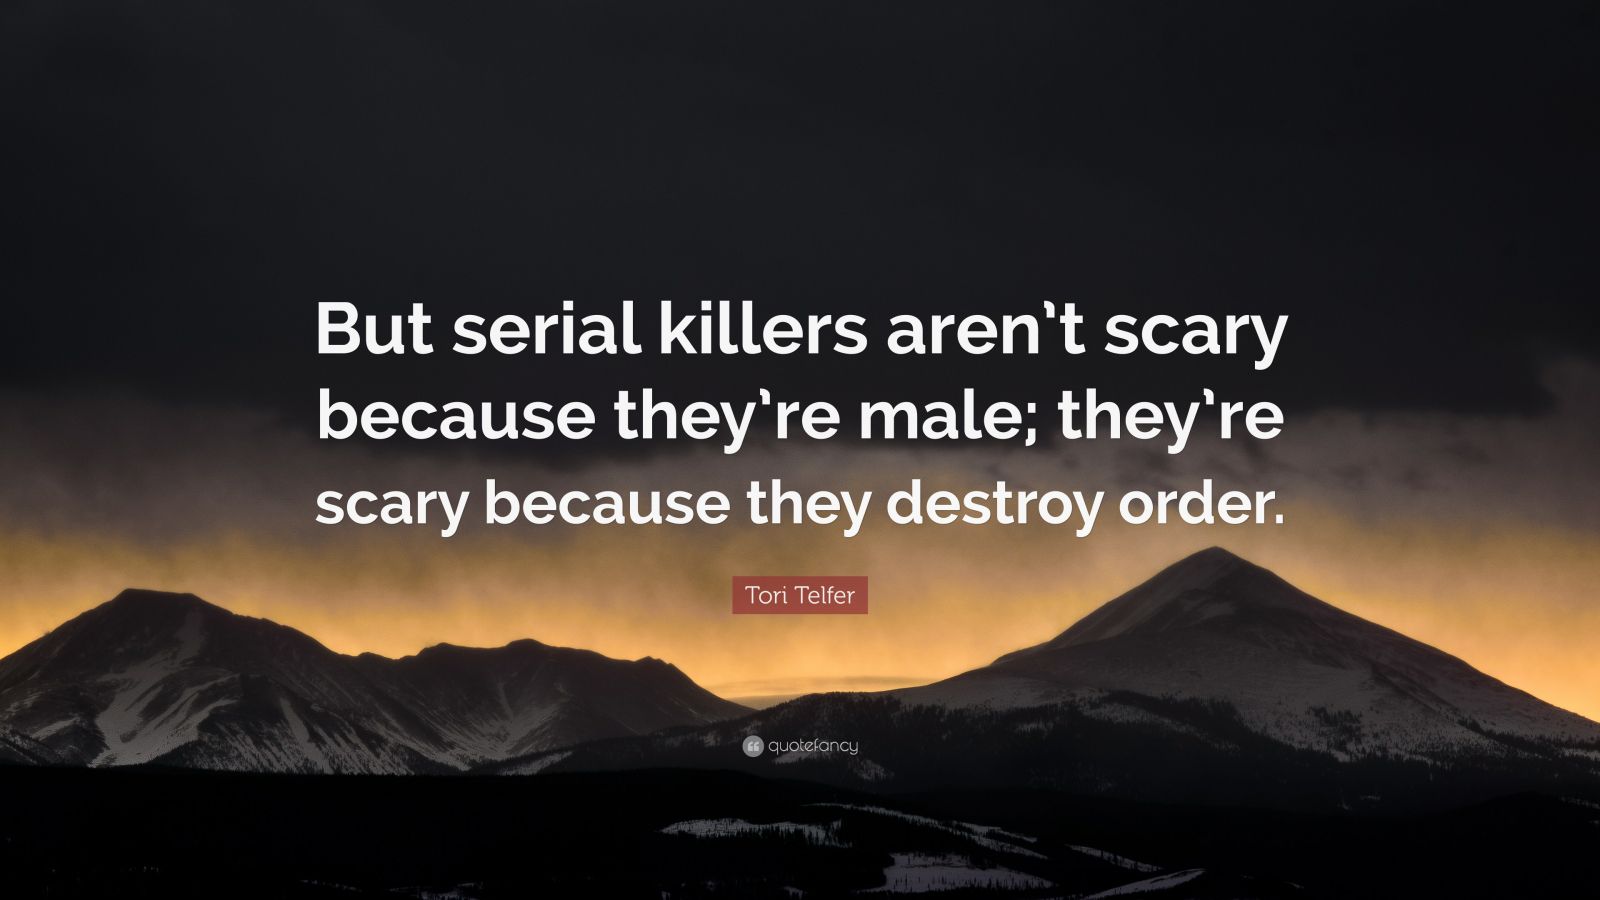 Tori Telfer Quote: “But serial killers aren’t scary because they’re ...